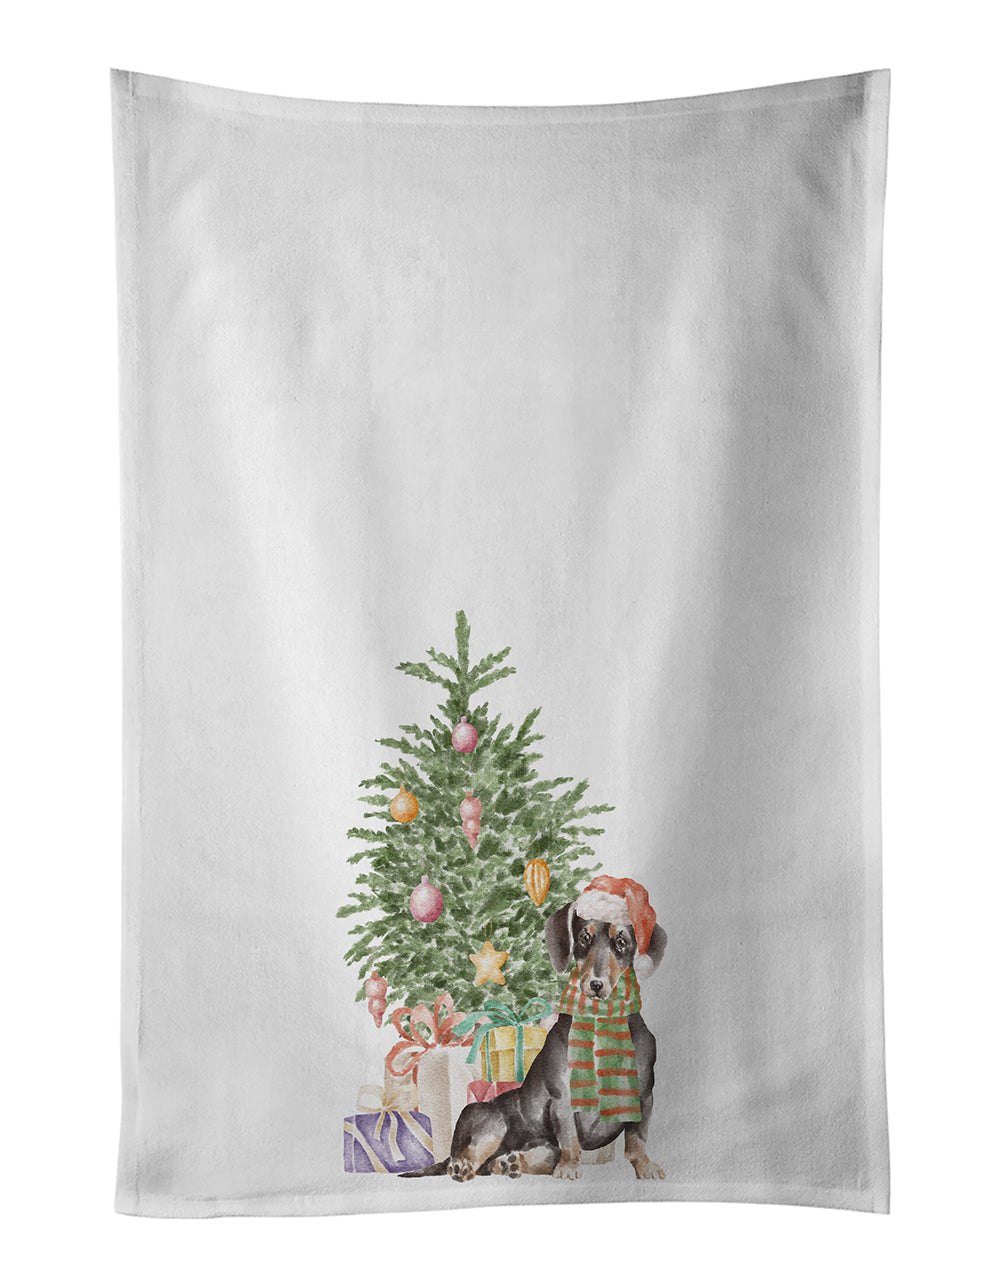 Buy this Dachshund Black Tan Christmas Presents and Tree White Kitchen Towel Set of 2